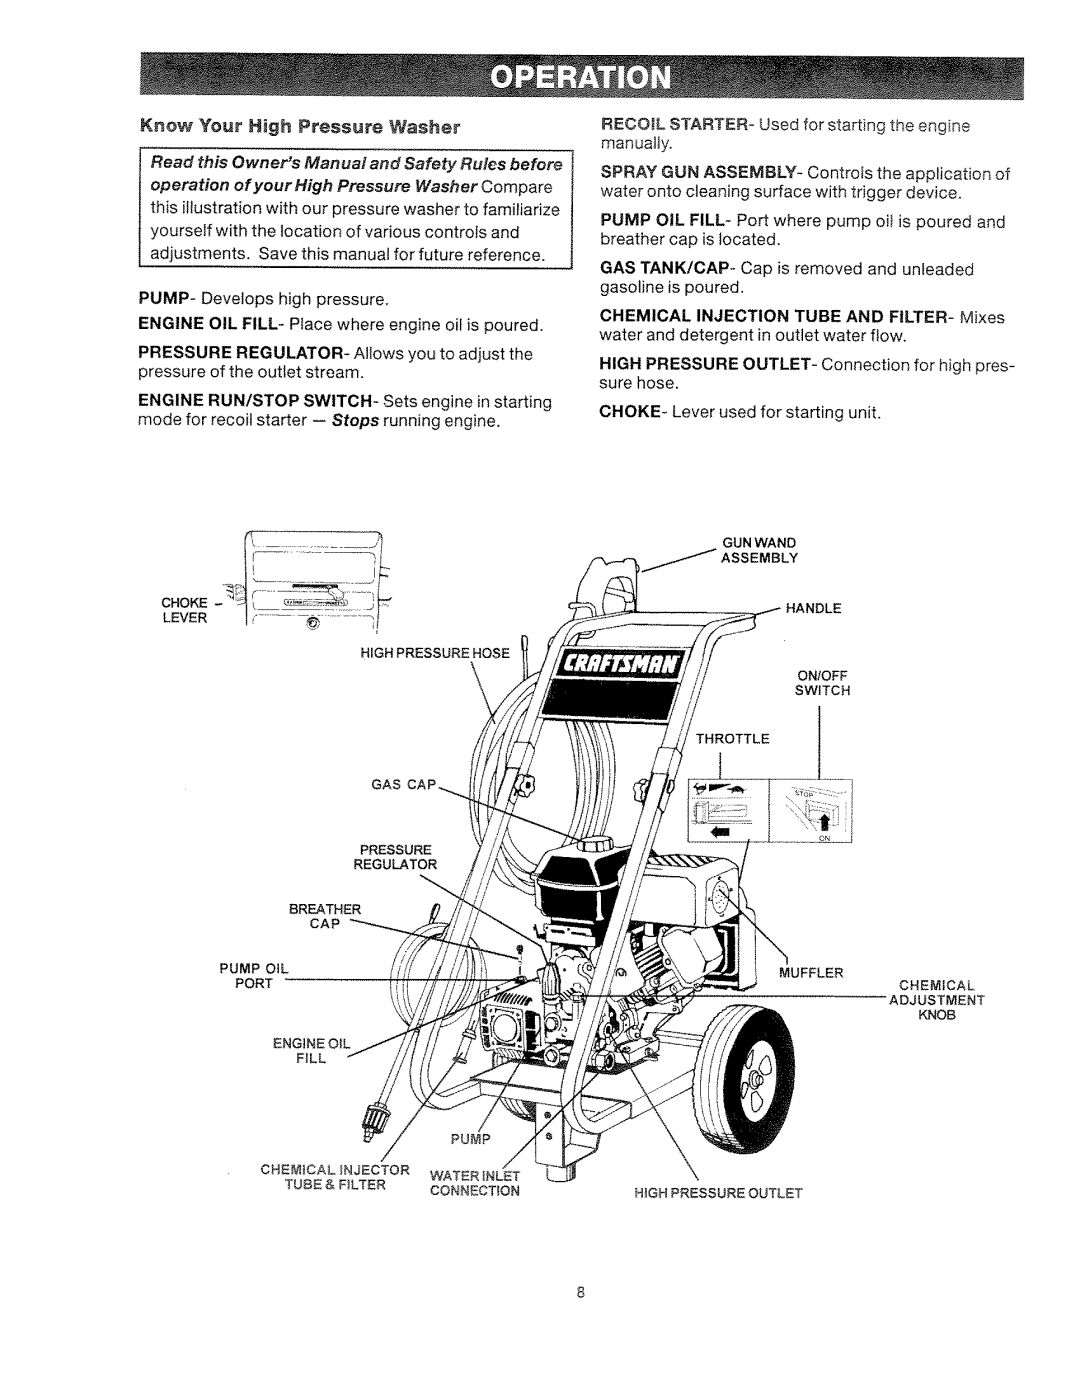 Craftsman 919.762500 manual Know Your High Pressure Washer 